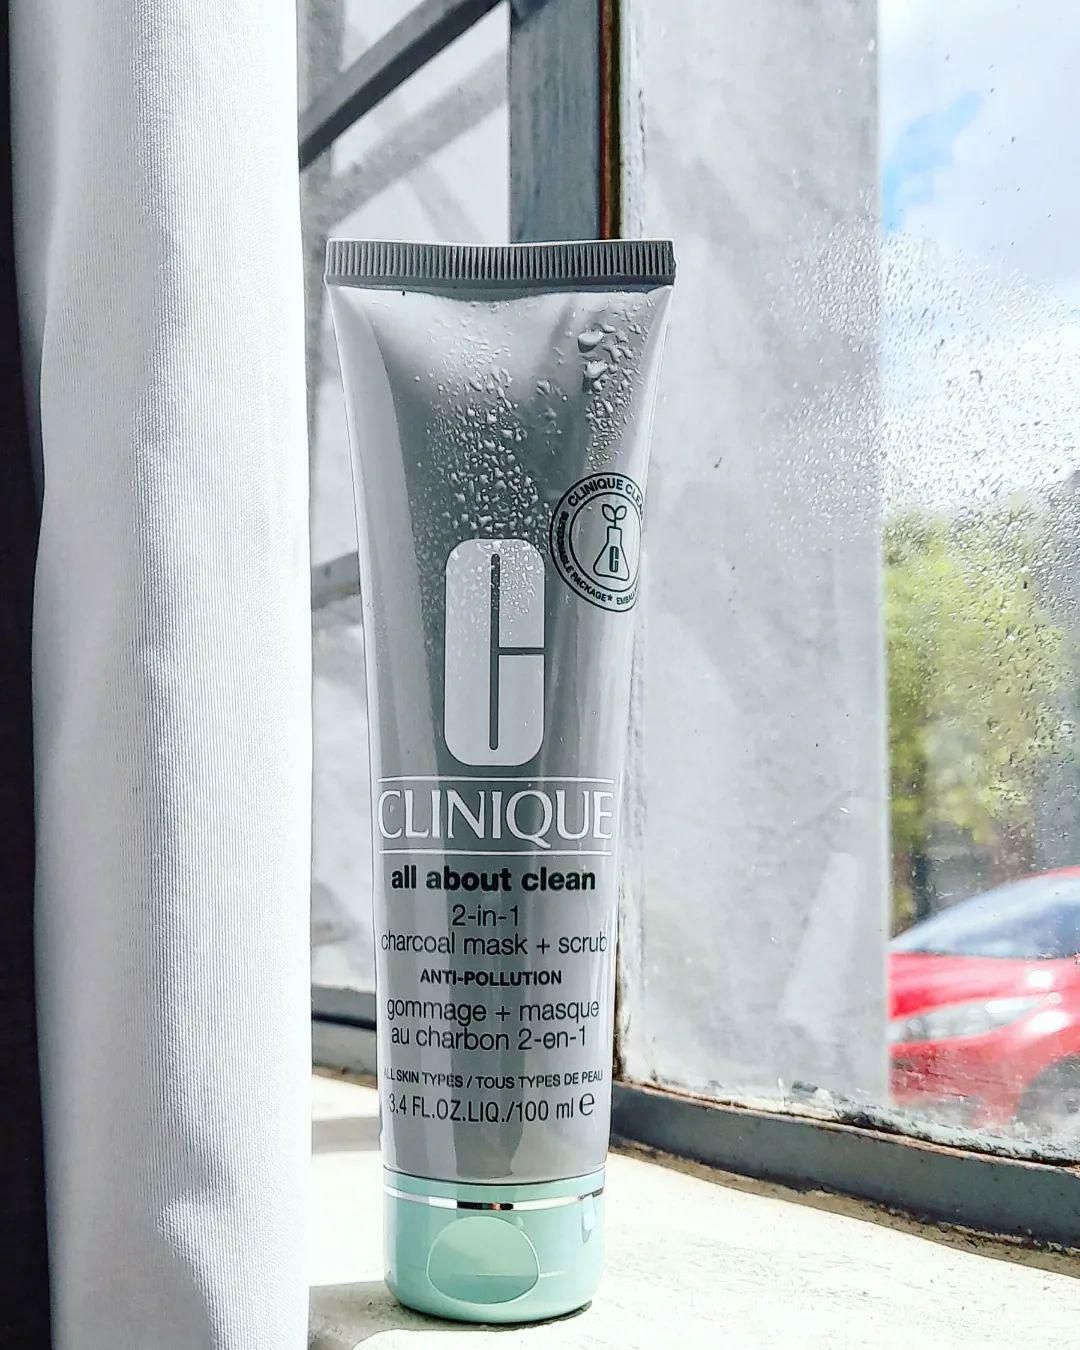 Skincare Termahal - Clinique All About Clean 2-in-1 Charcoal Mask and Scrub